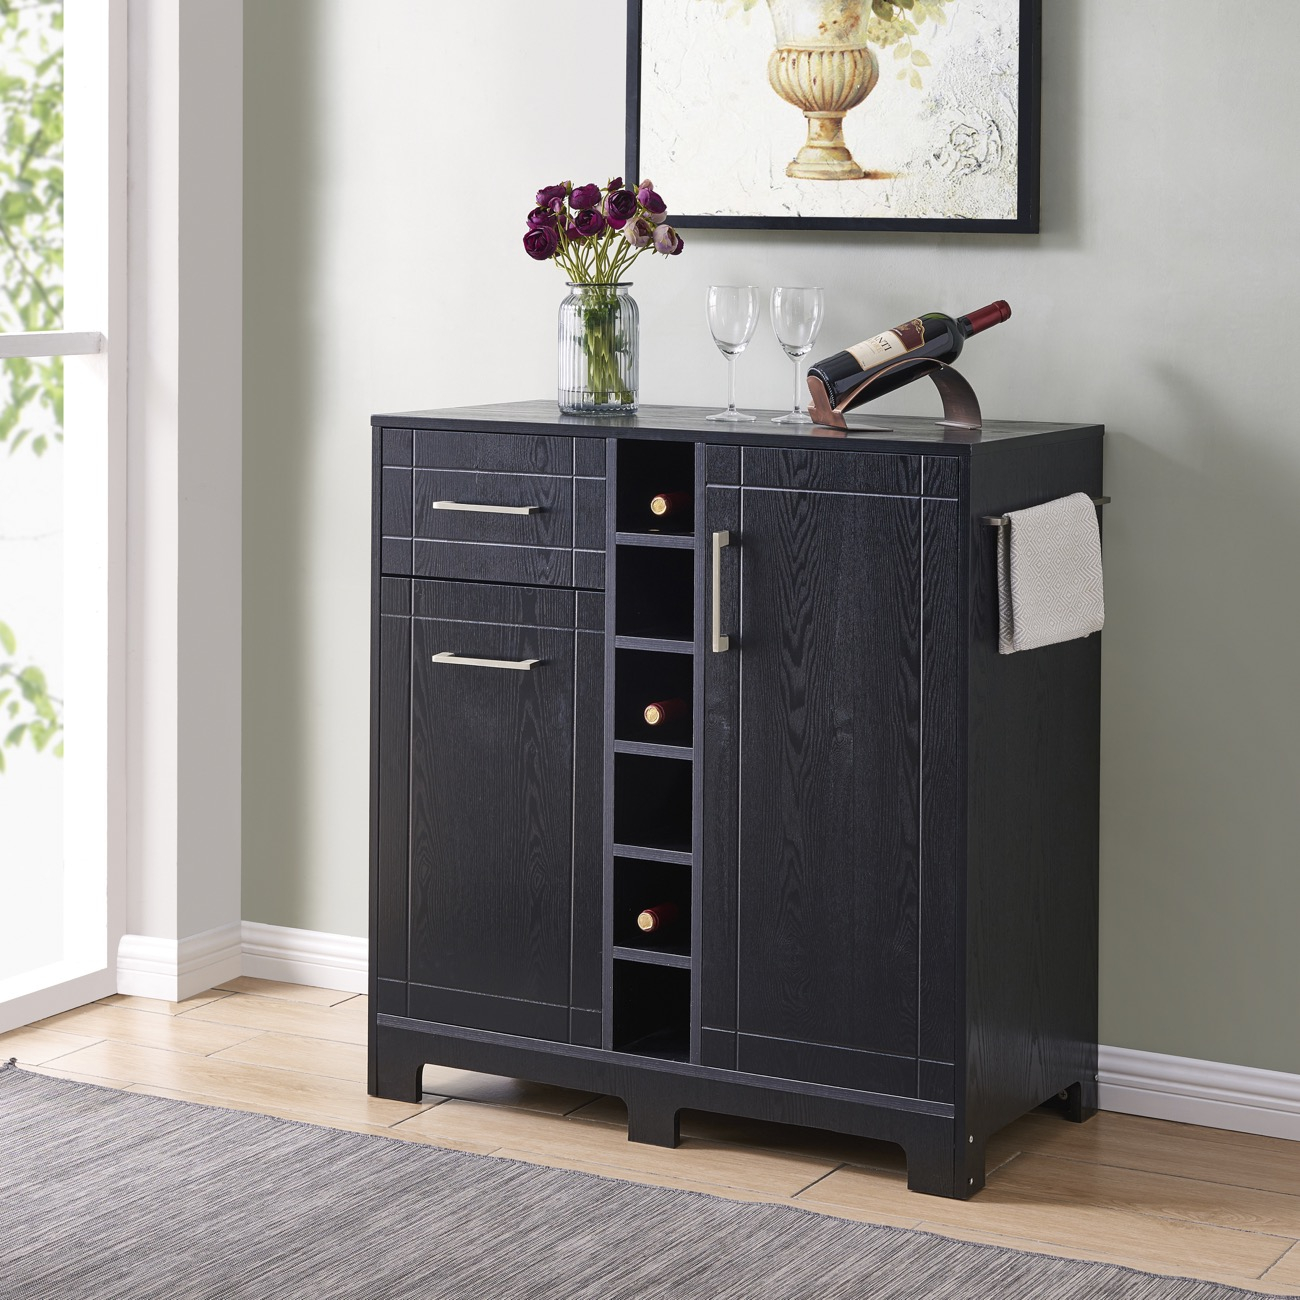 Details About Modern Buffet Server Sideboard Bar Cabinet With Wine Storage And Racks Black in sizing 1300 X 1300